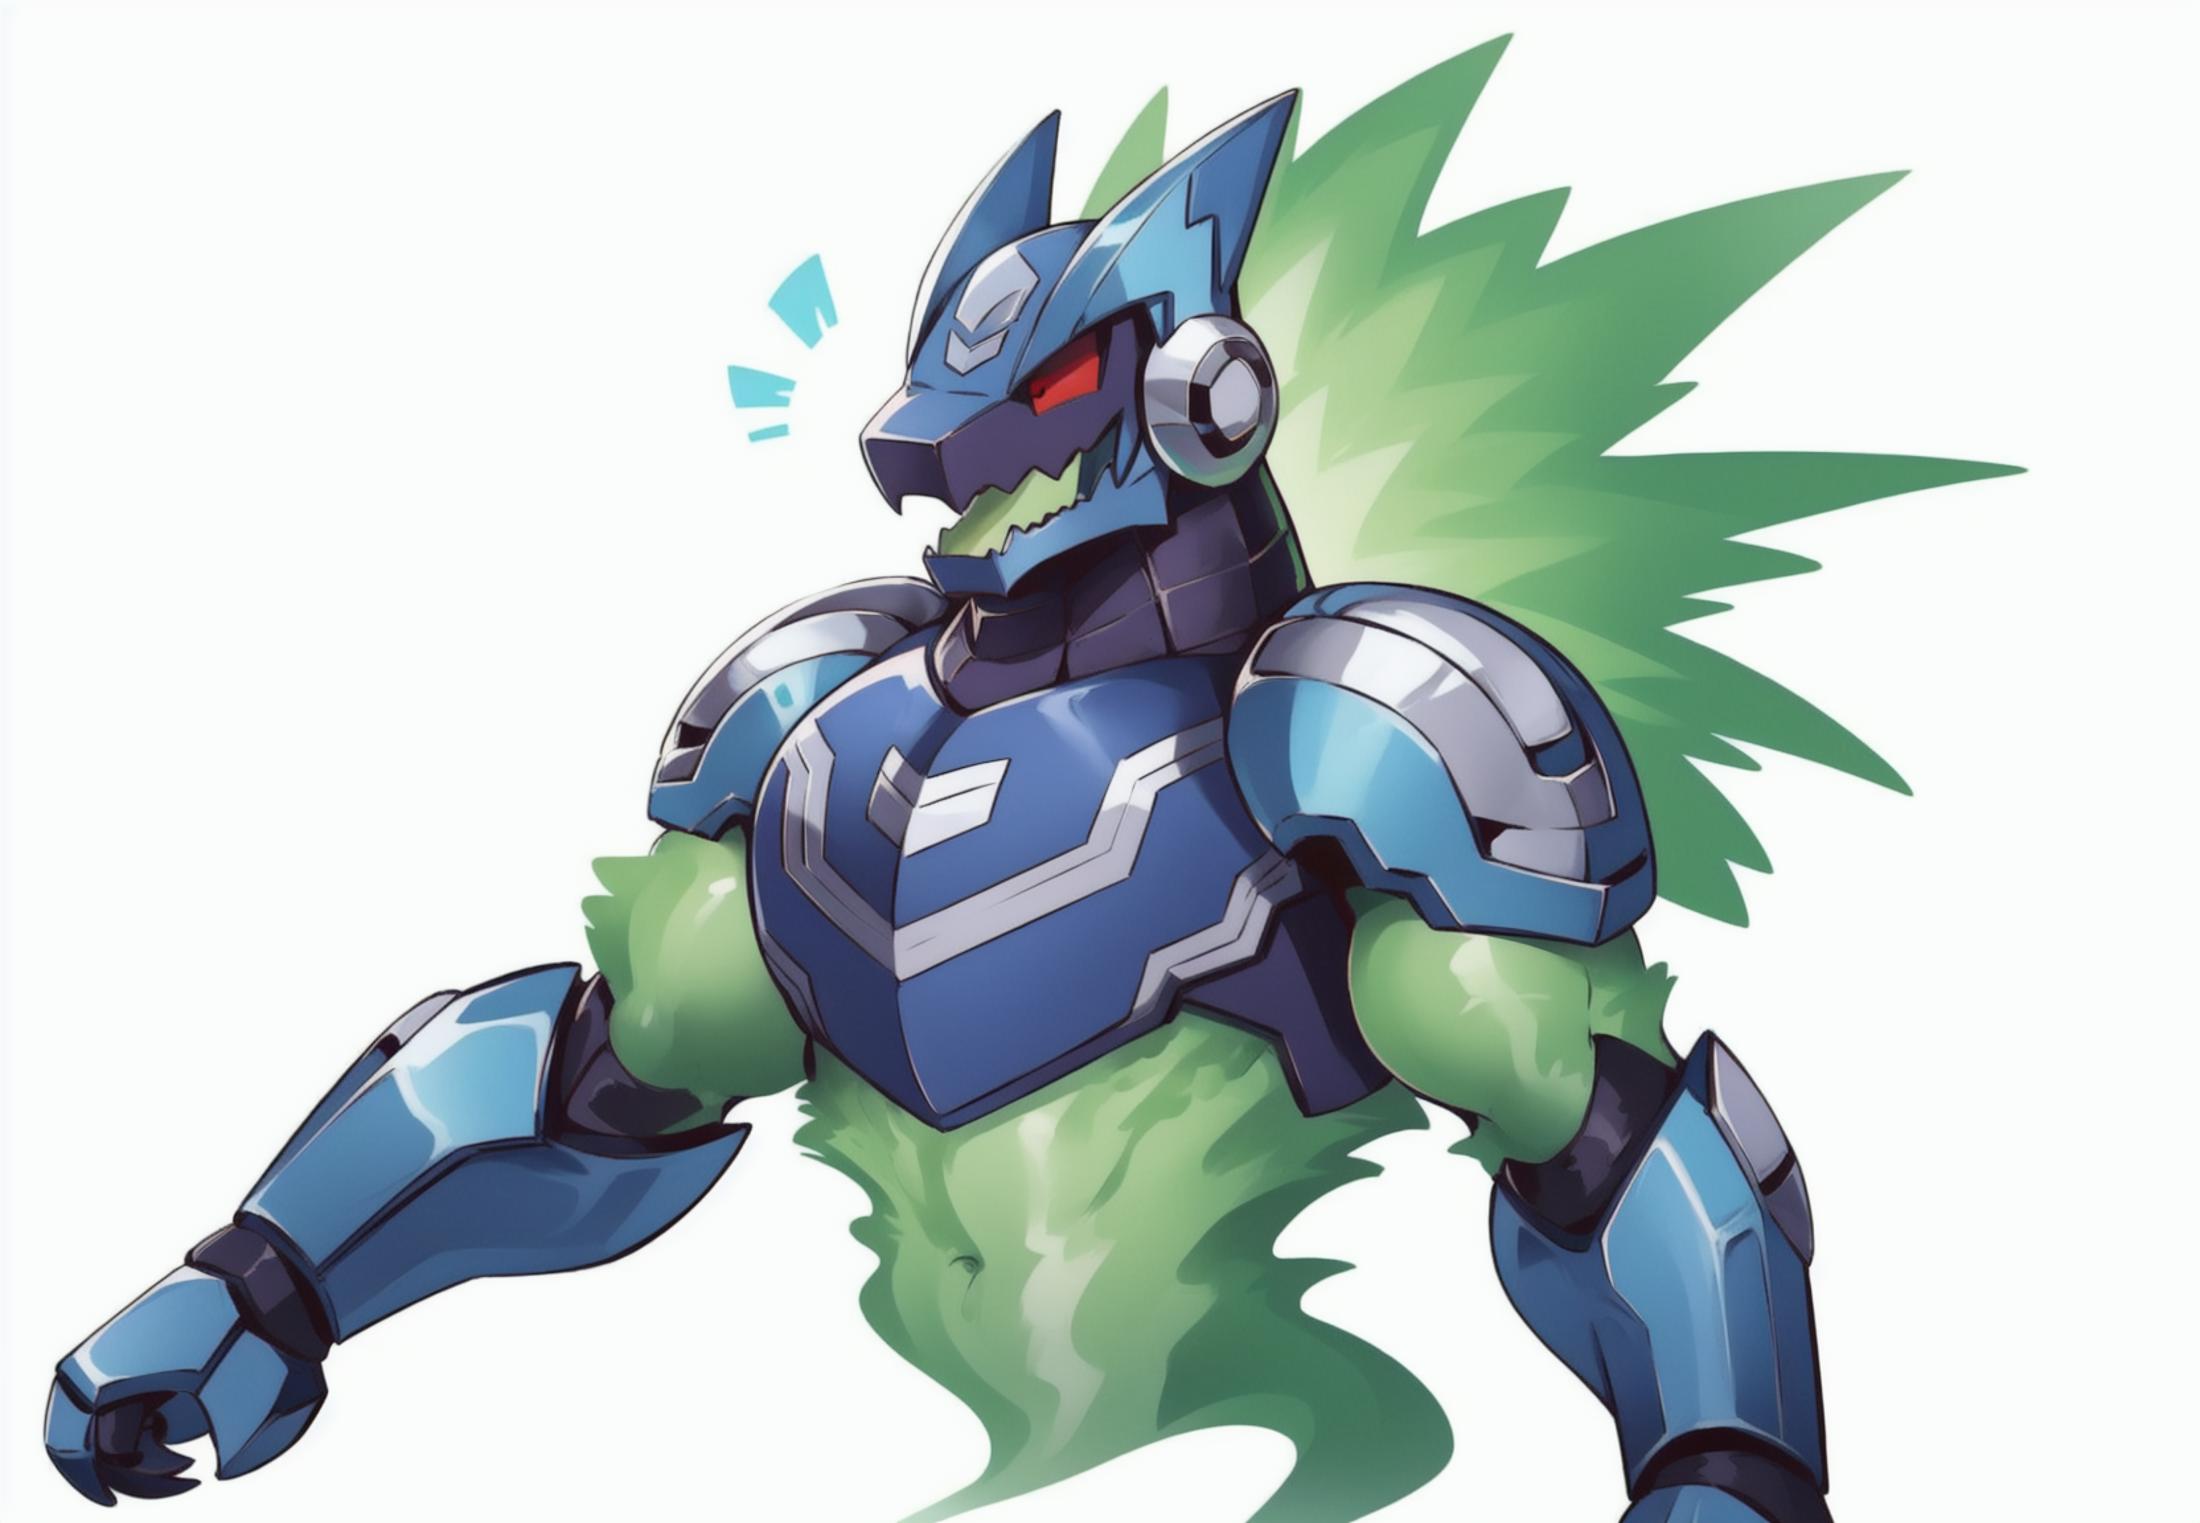 Omega-xis image by indigowing